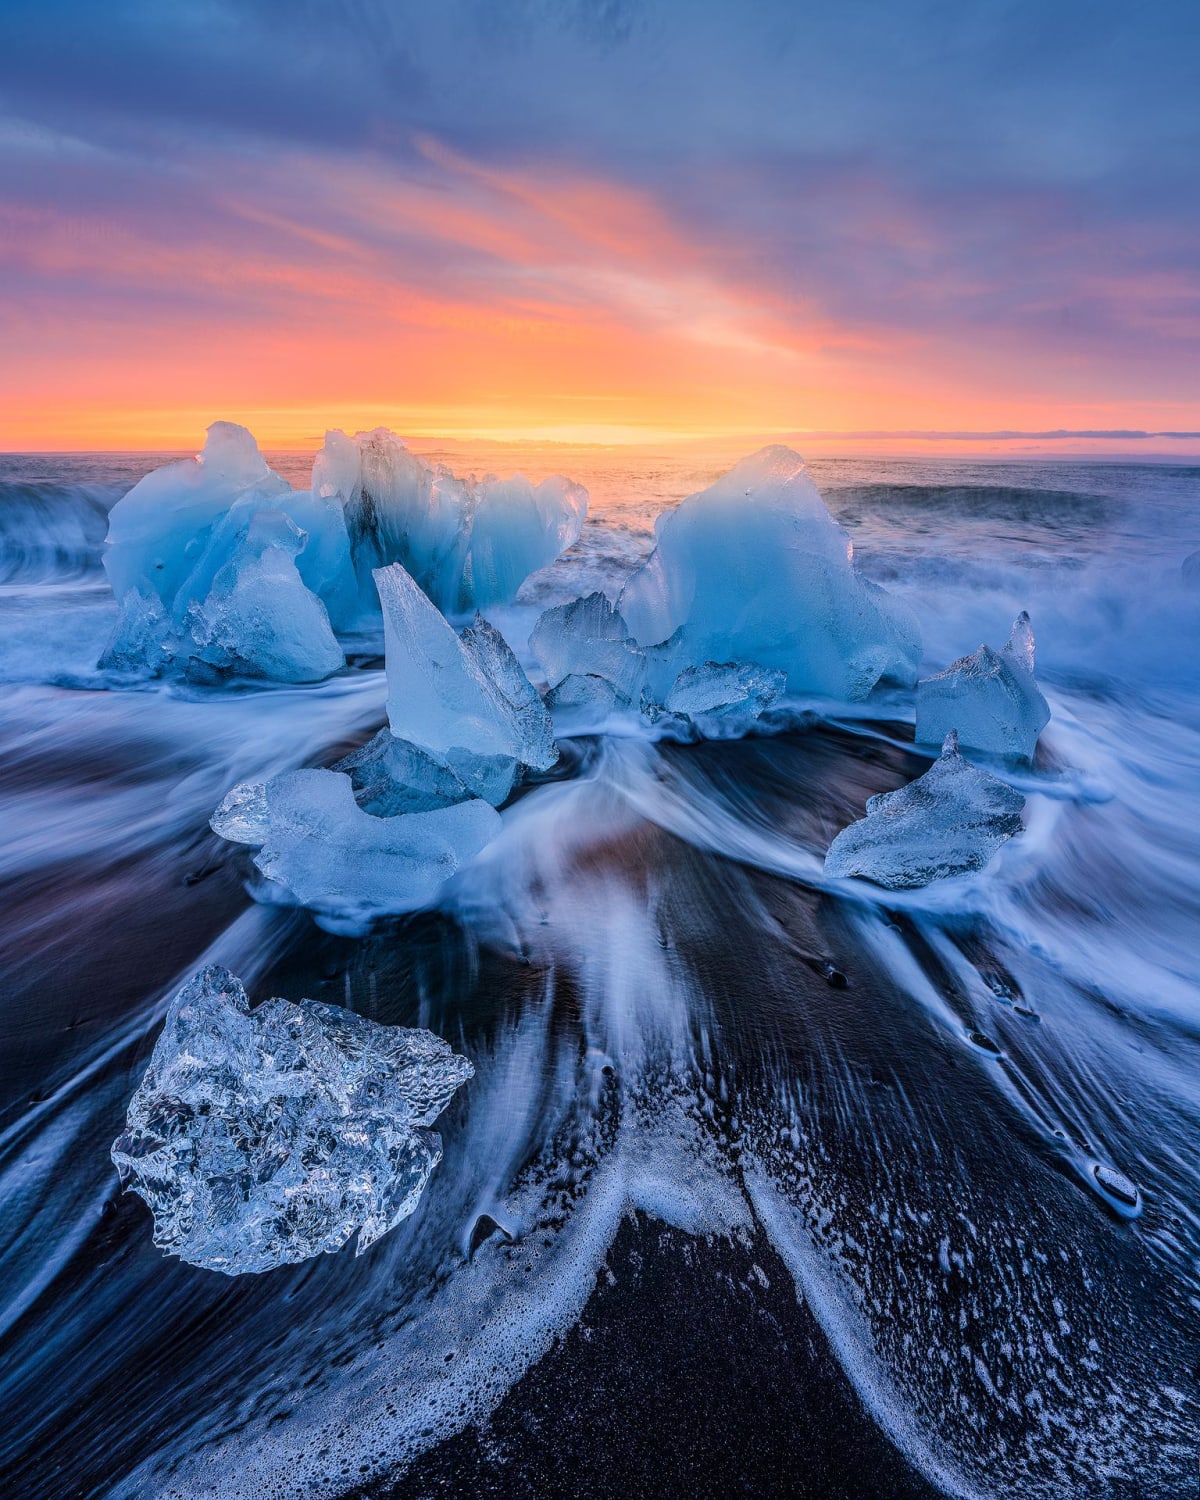 Fire and Ice, the best combination, of course in Iceland